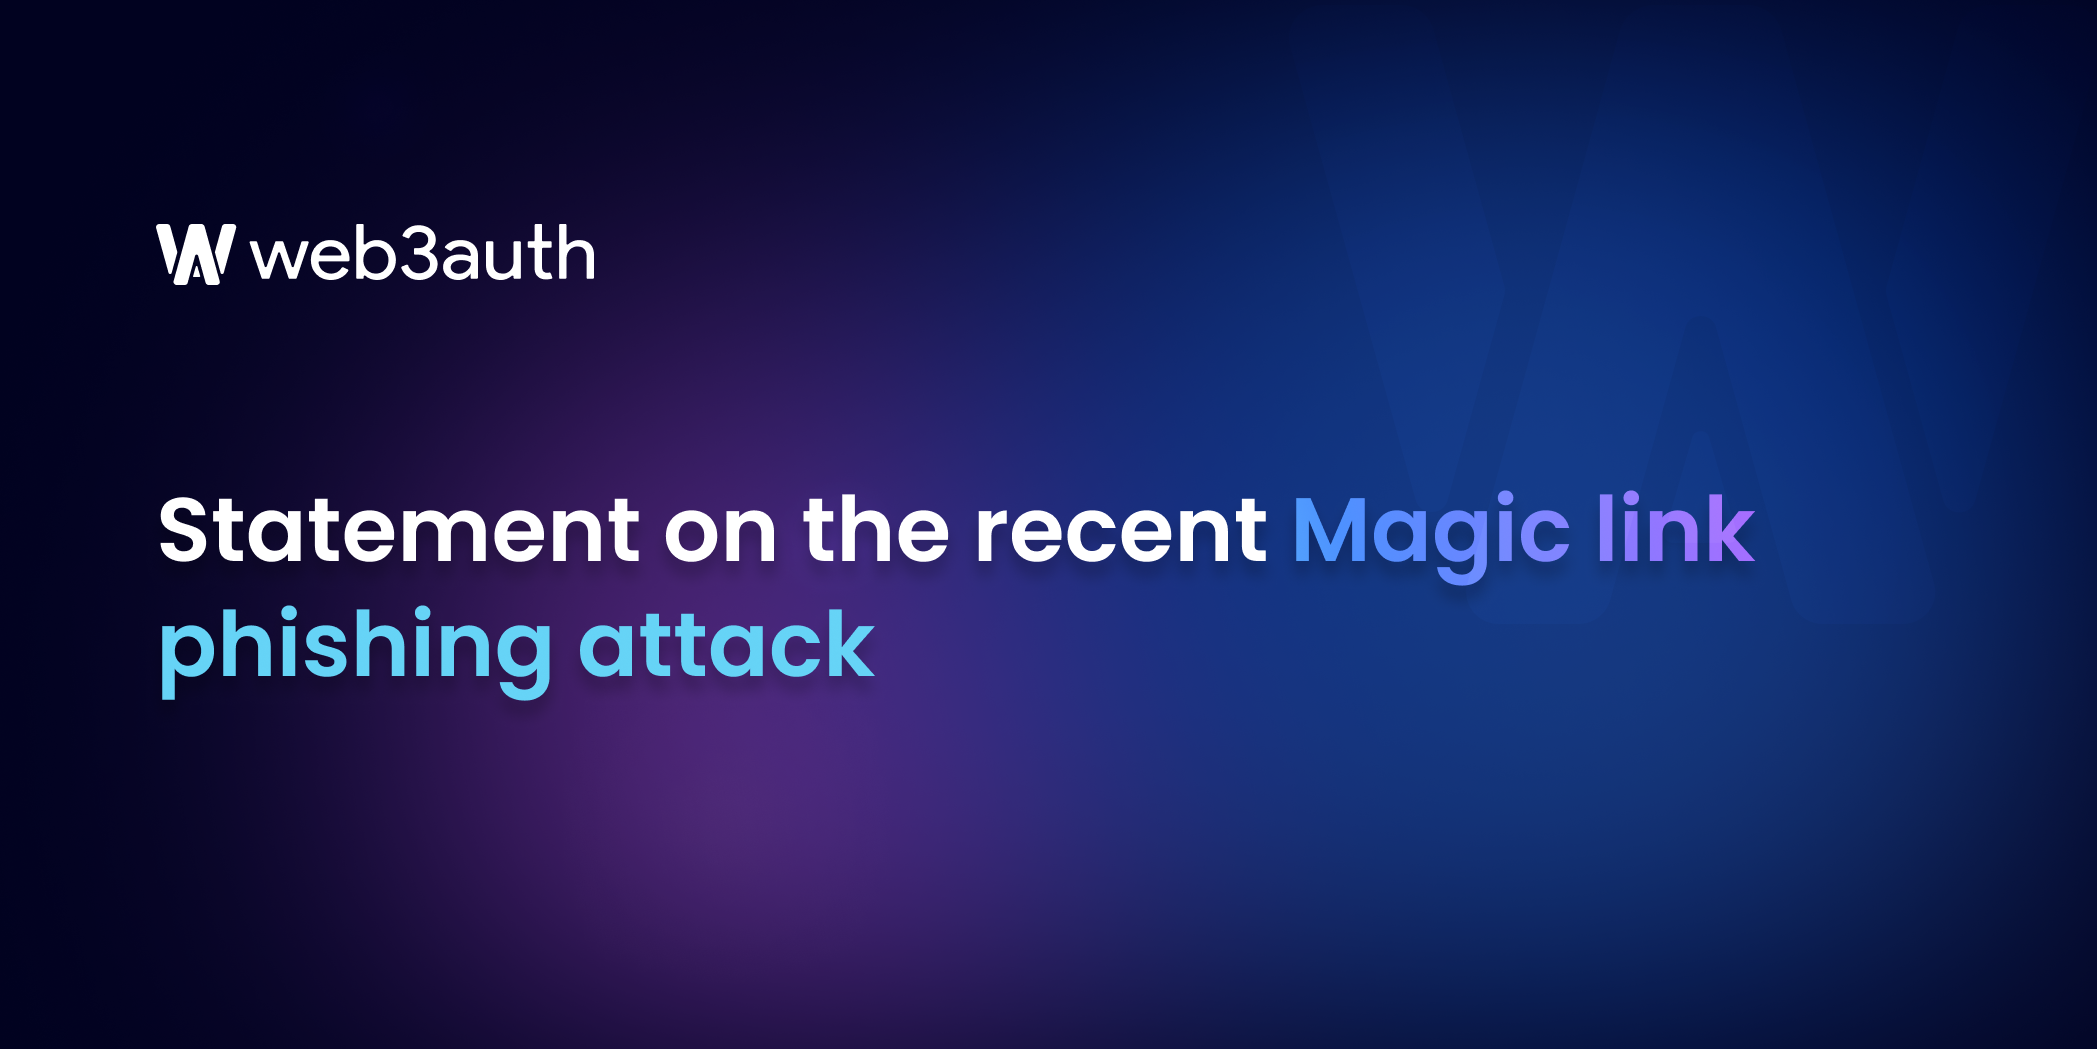 Web3Auth’s statement on the recent Magic Link phishing attack